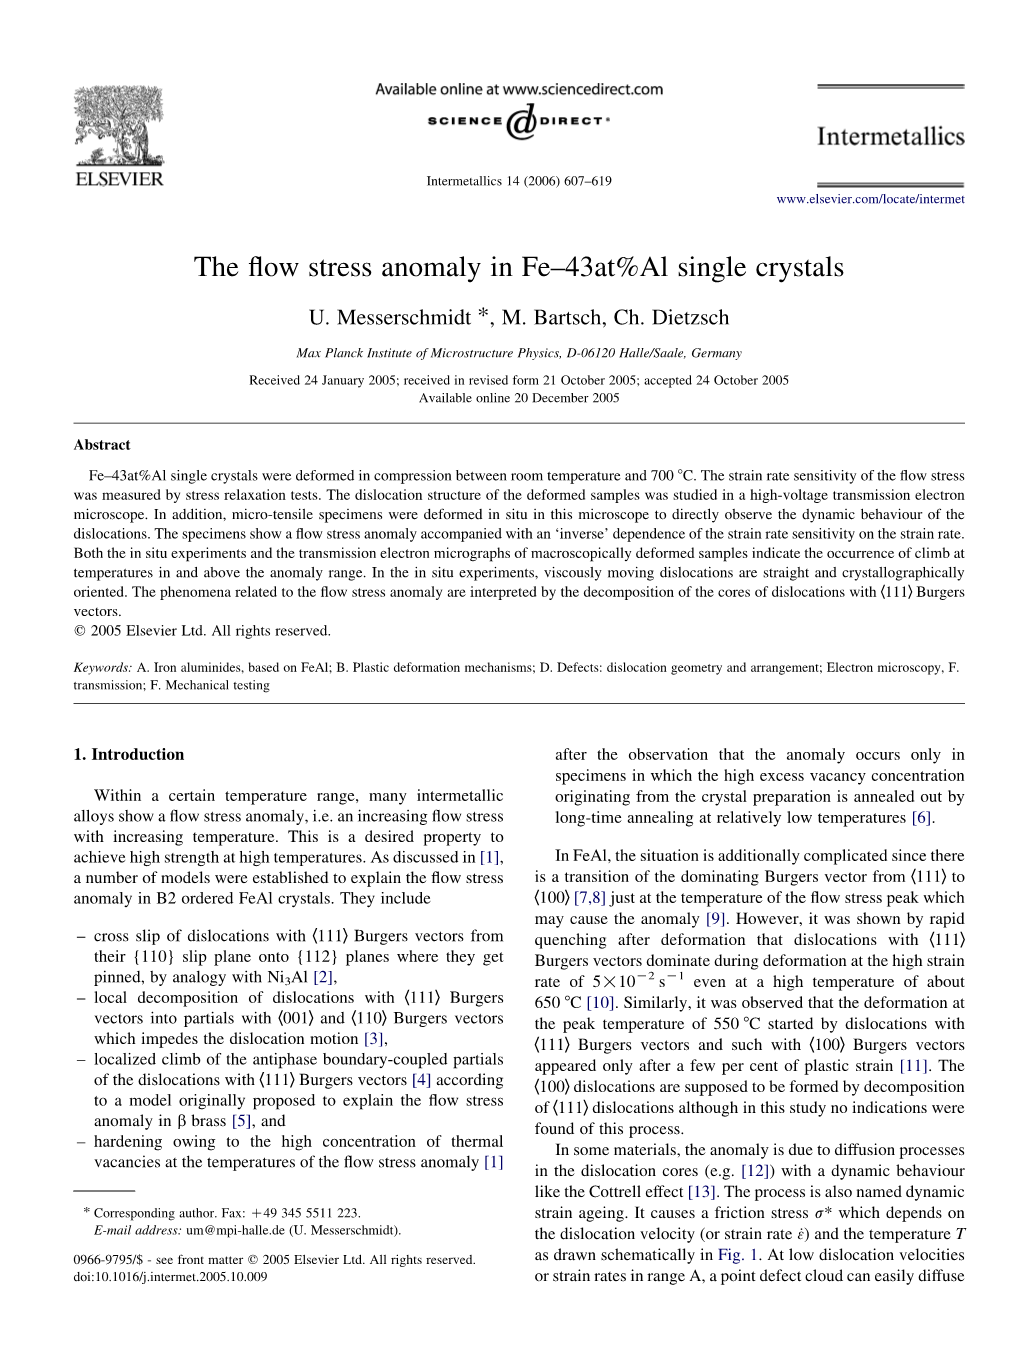 The Flow Stress Anomaly in Fe–43At%Al Single Crystals